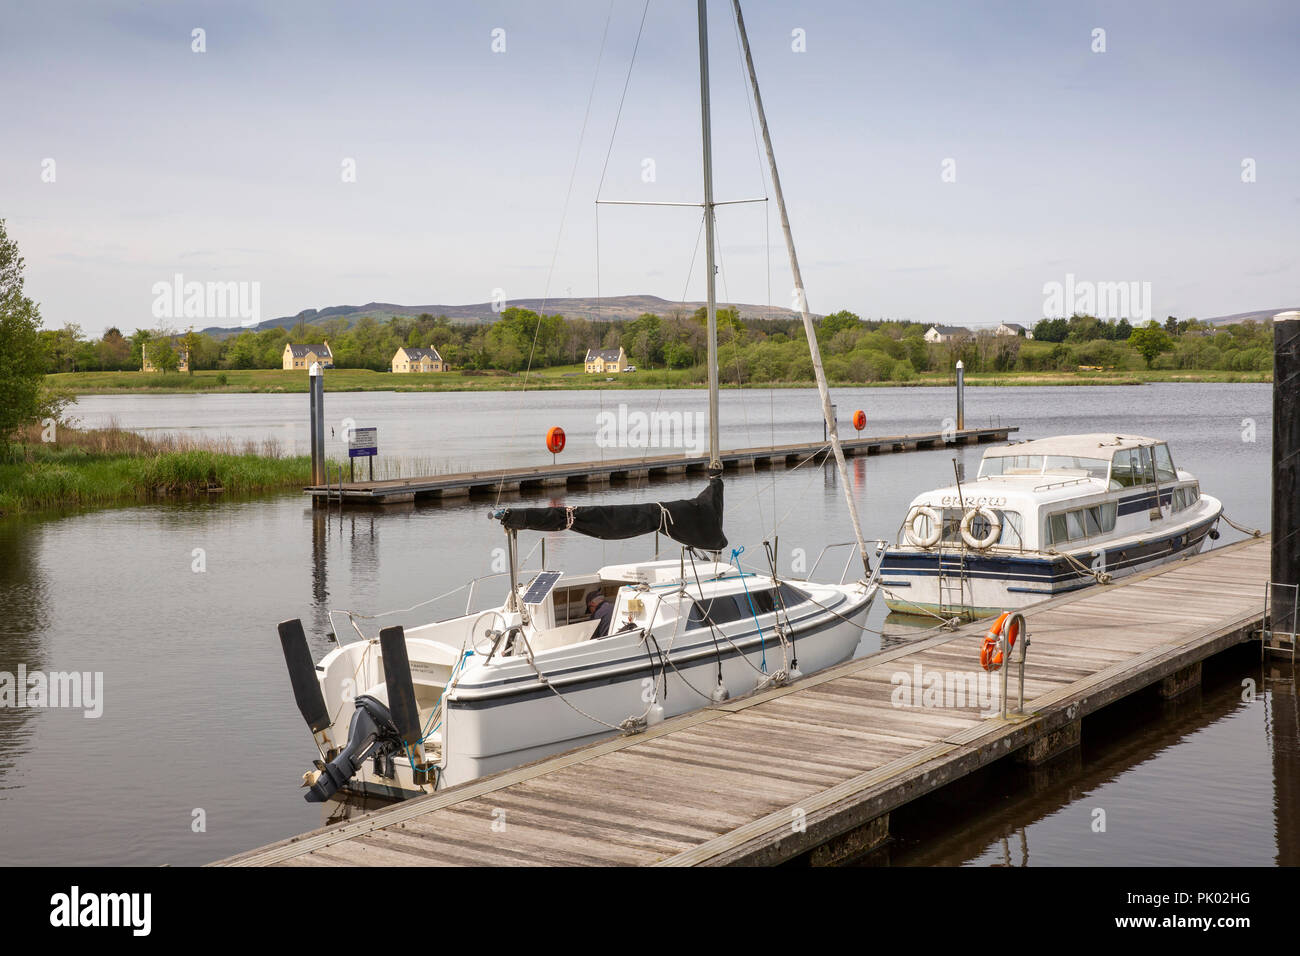 Ireland, Co Leitrim, Drumshanbo, boats moored on Lough Allen pontoon at Shannon Blueway canal locks Stock Photo